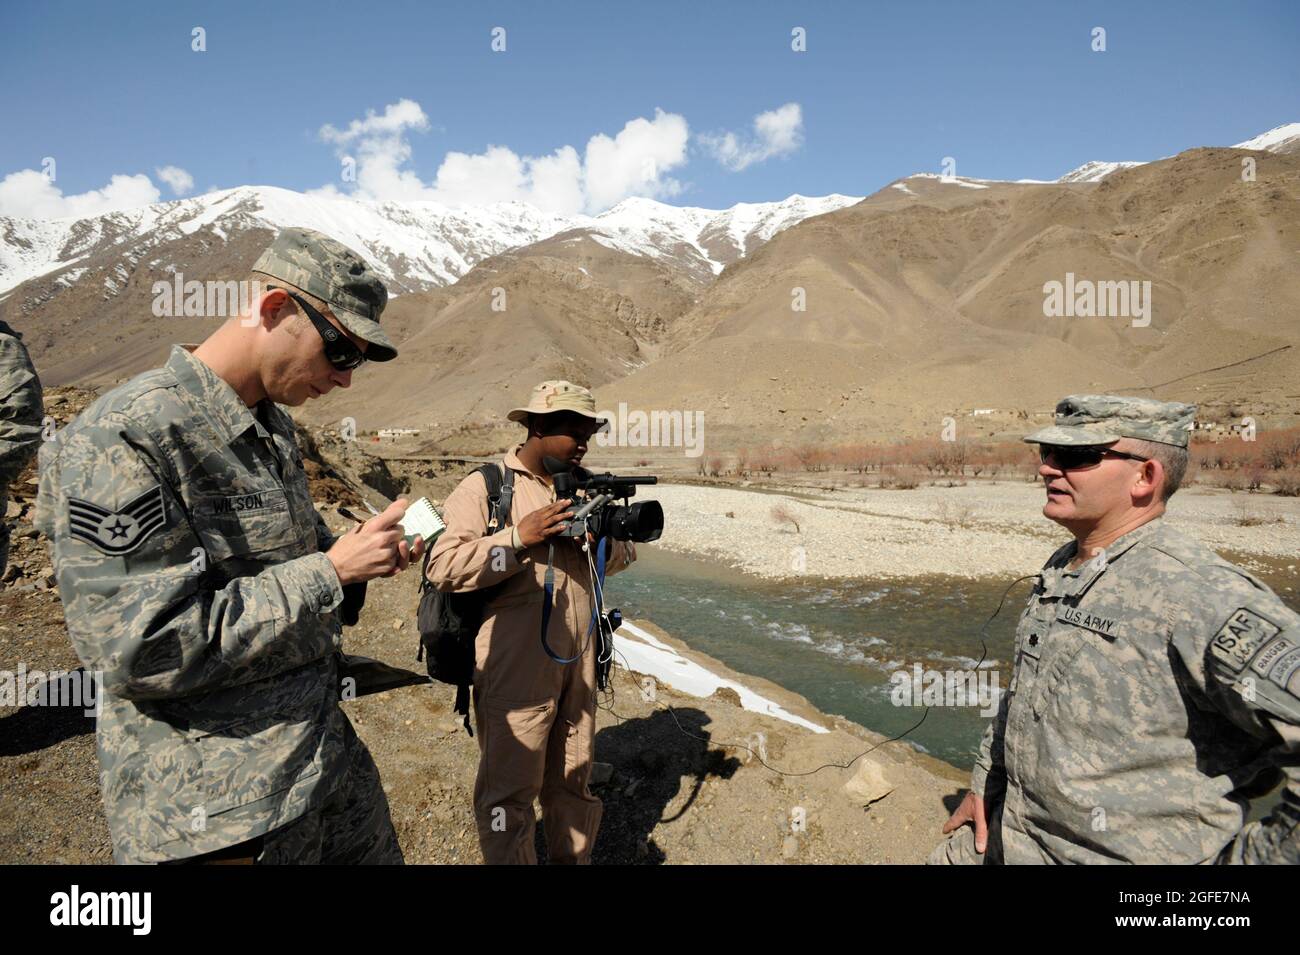 U.S. Air Force Staff Sgt. Zachary Wilson,  journalist and Staff Sgt. Chalanda Roberts, videogrpher, both from the AFCENT Combat Camera Team, interview U.S. Army Lt. Col. Steve Lancaster, Panjshir Provincial Reconstruction Team deputy commander on Mar. 5, 2009 in support of Operation Enduring Freedom.(U.S. Air Force photo by Staff Sgt. James L. Harper Jr.)Released Stock Photo